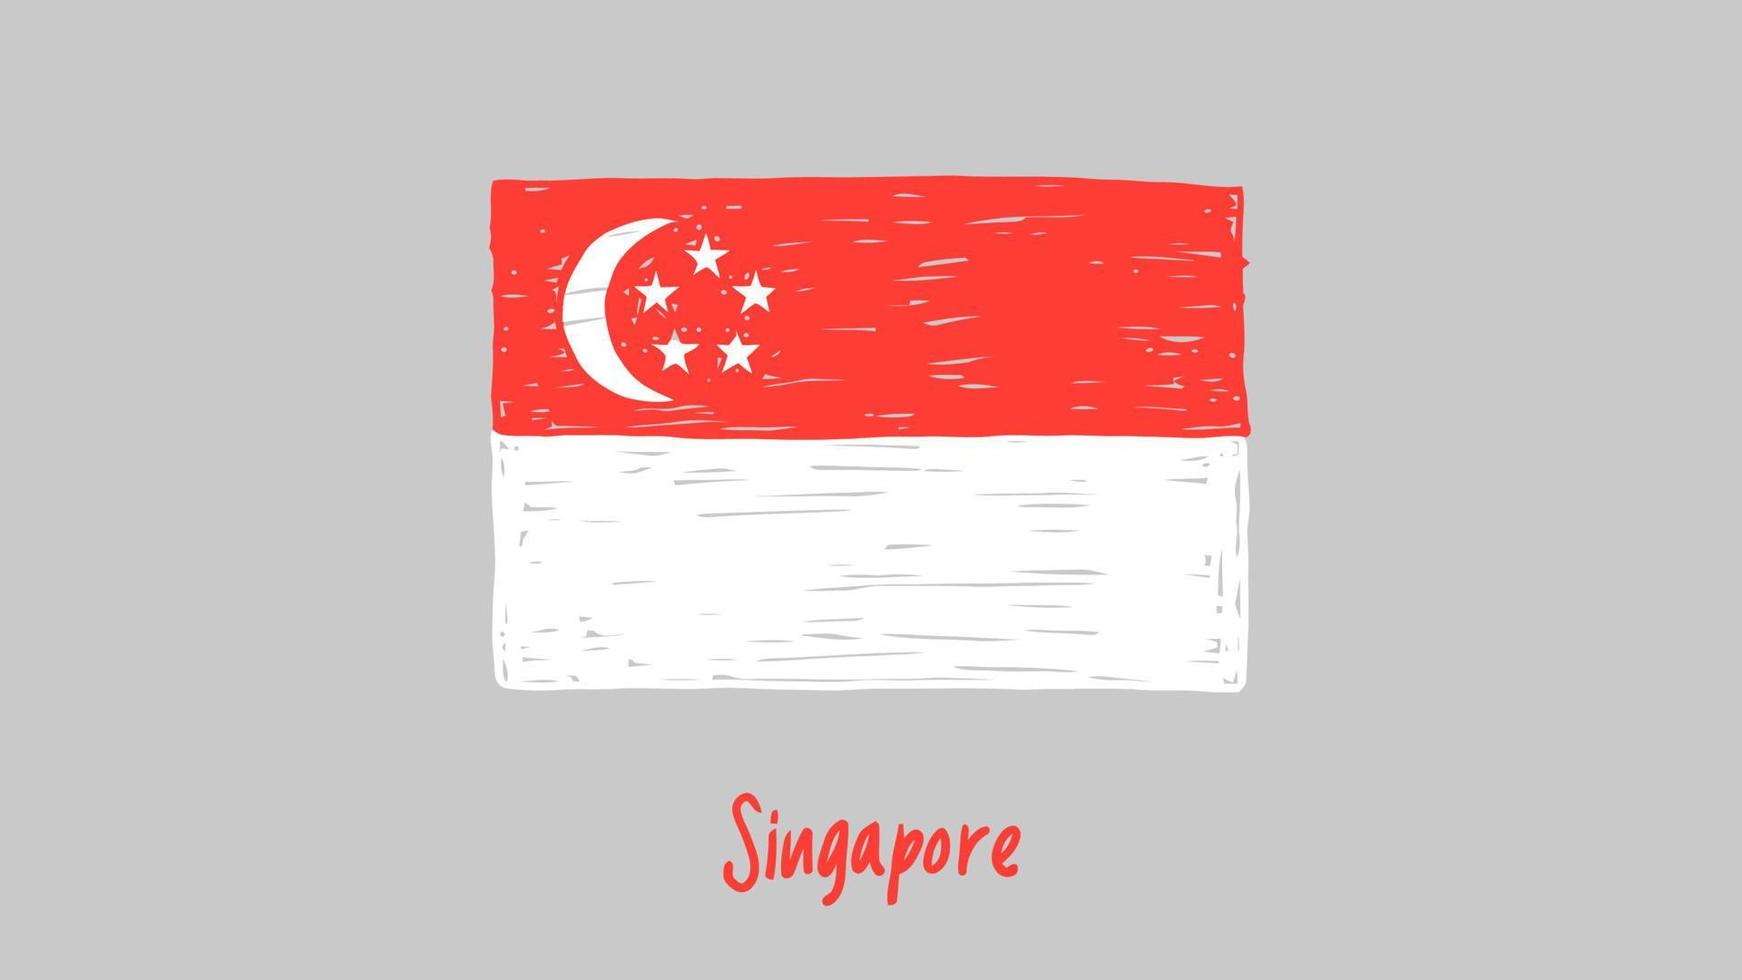 Singapore National Country Flag Marker or Pencil Sketch Illustration Vector